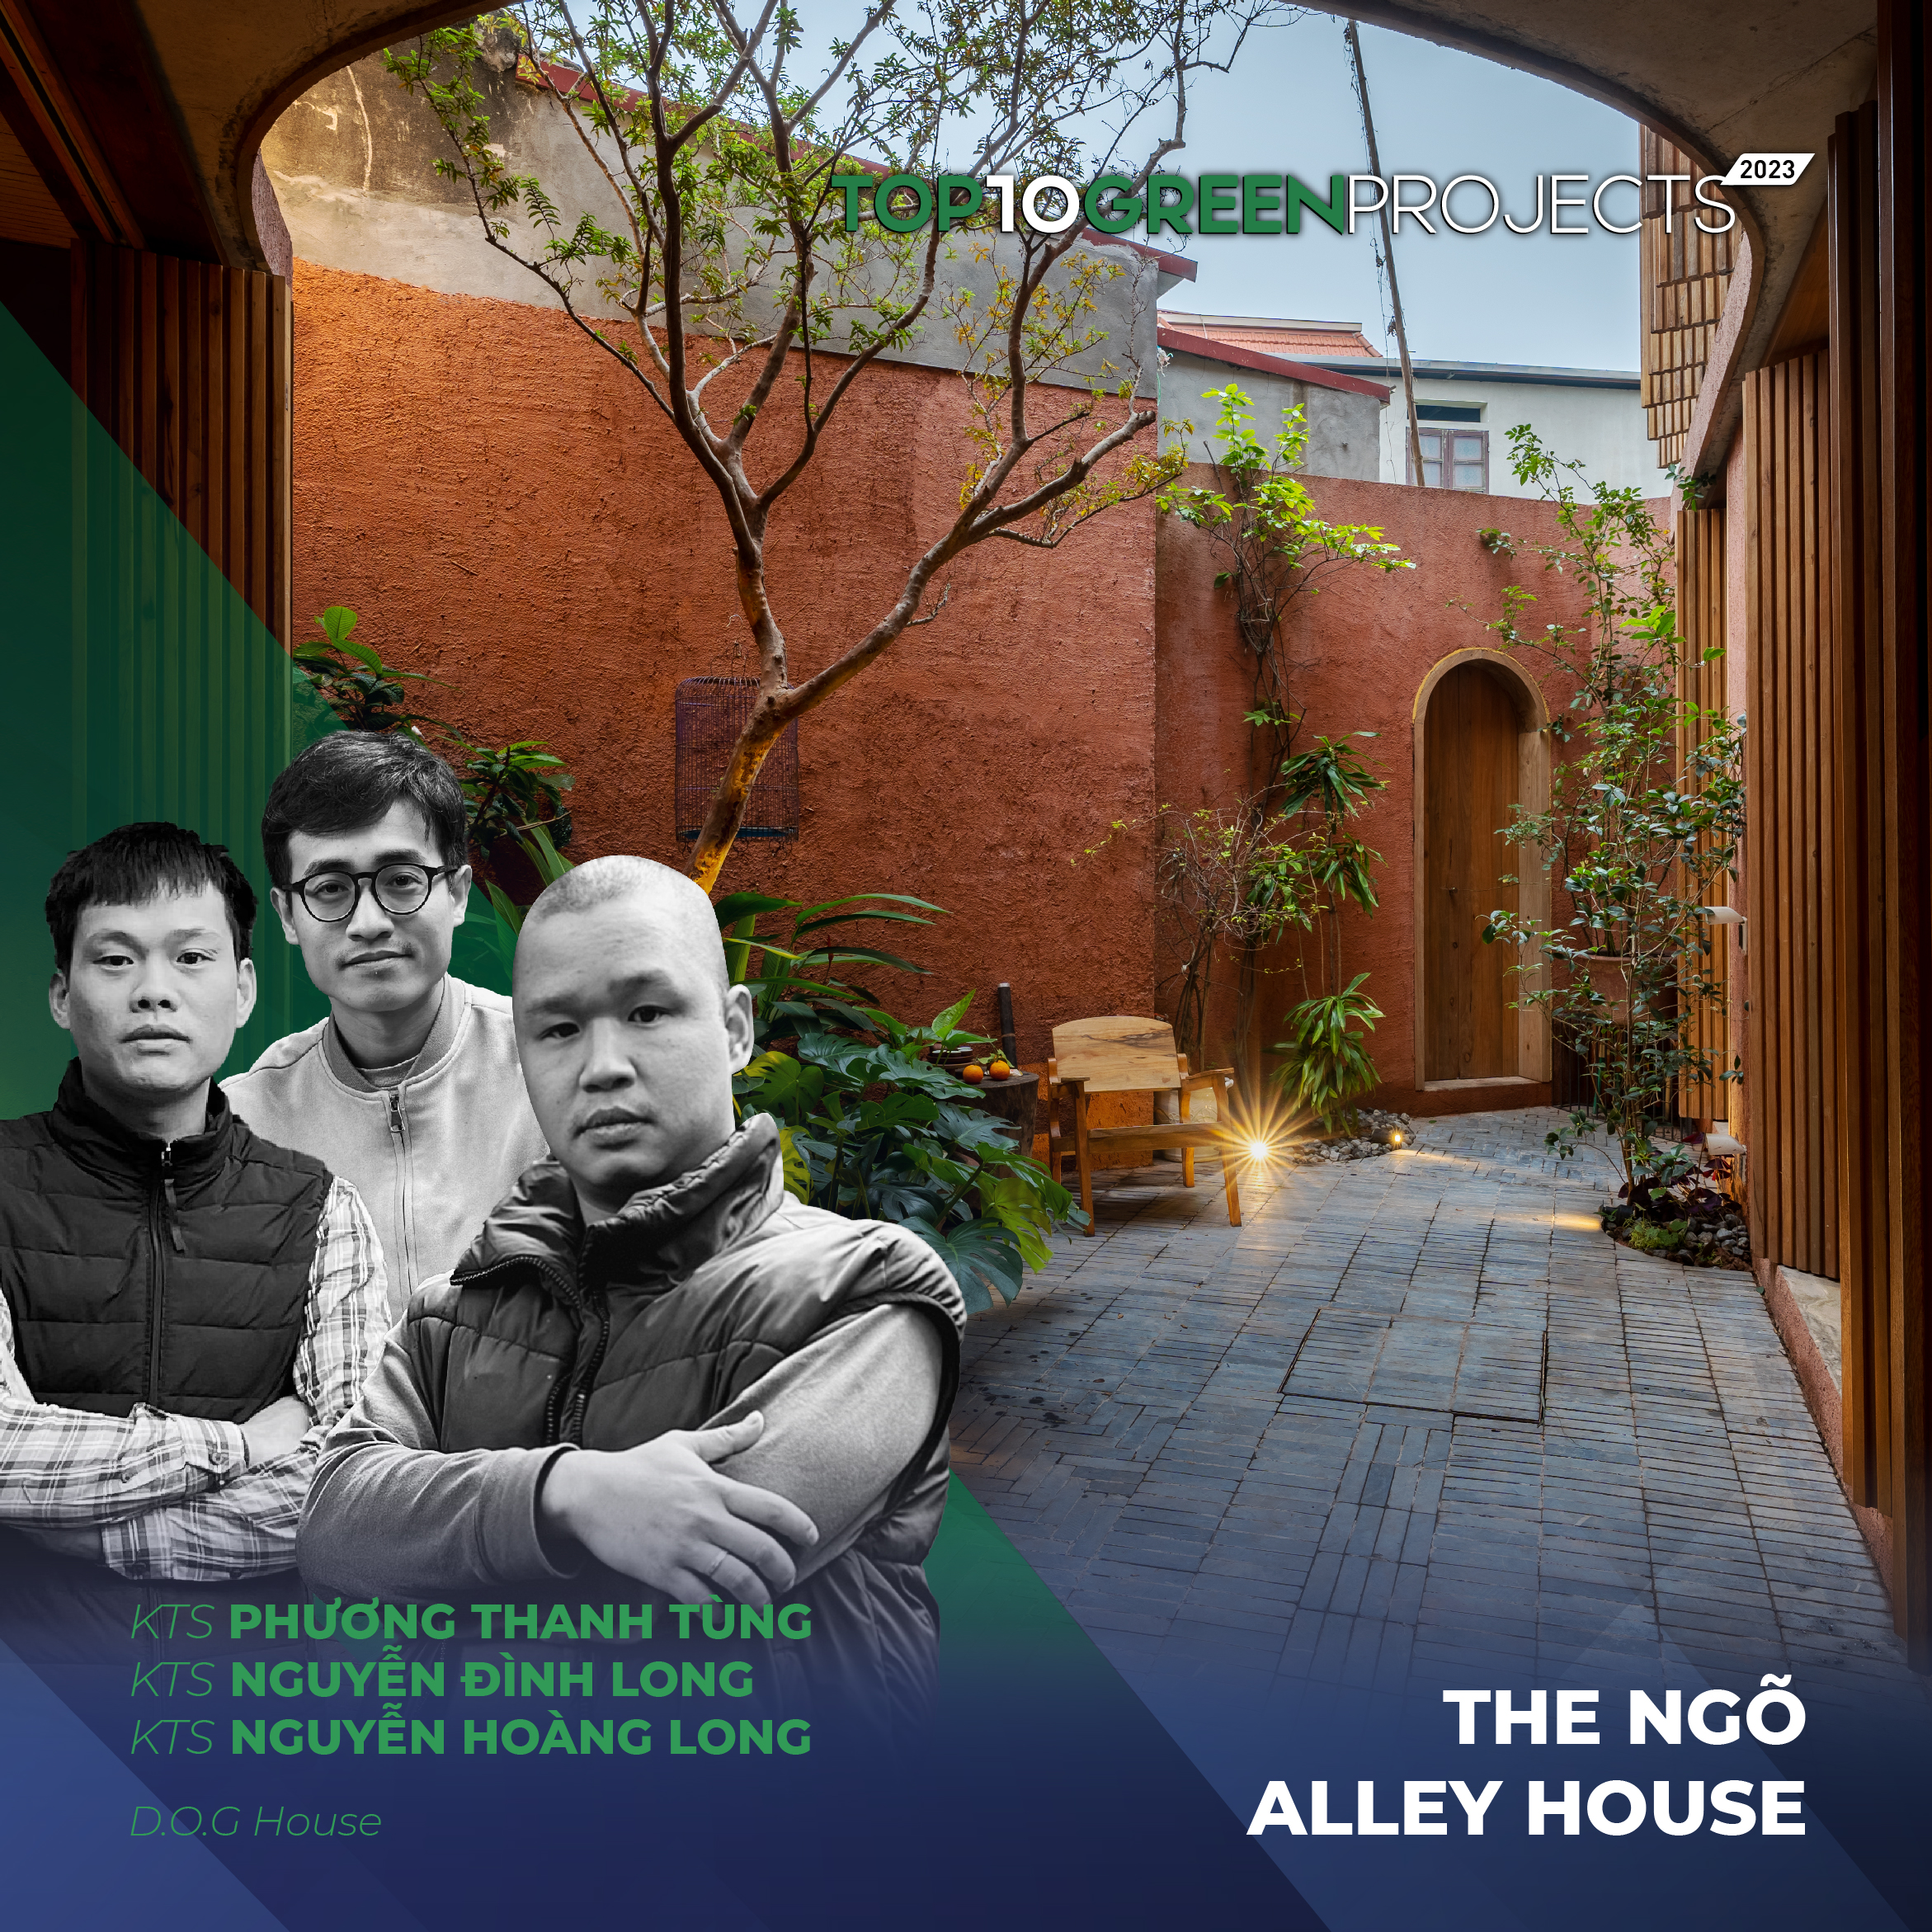 The NGÕ Alley House